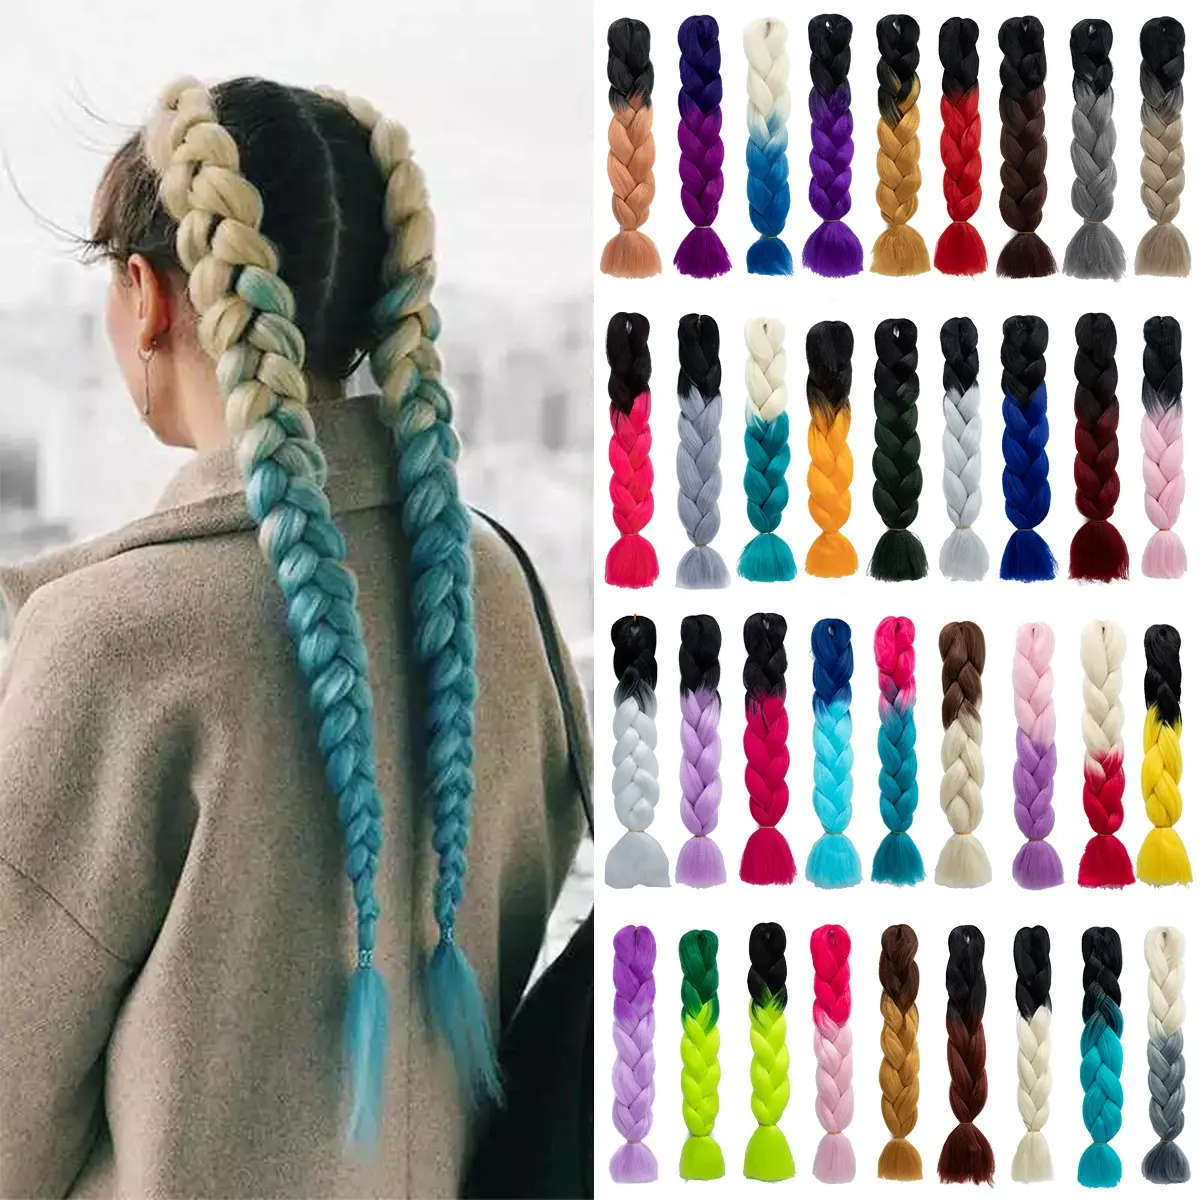 24in 100G Pre Stretched Afro Twist Jumbo Ombre Braiding Hair Extensions Ponytail Wig Braid Crotchet Braids for African Hair